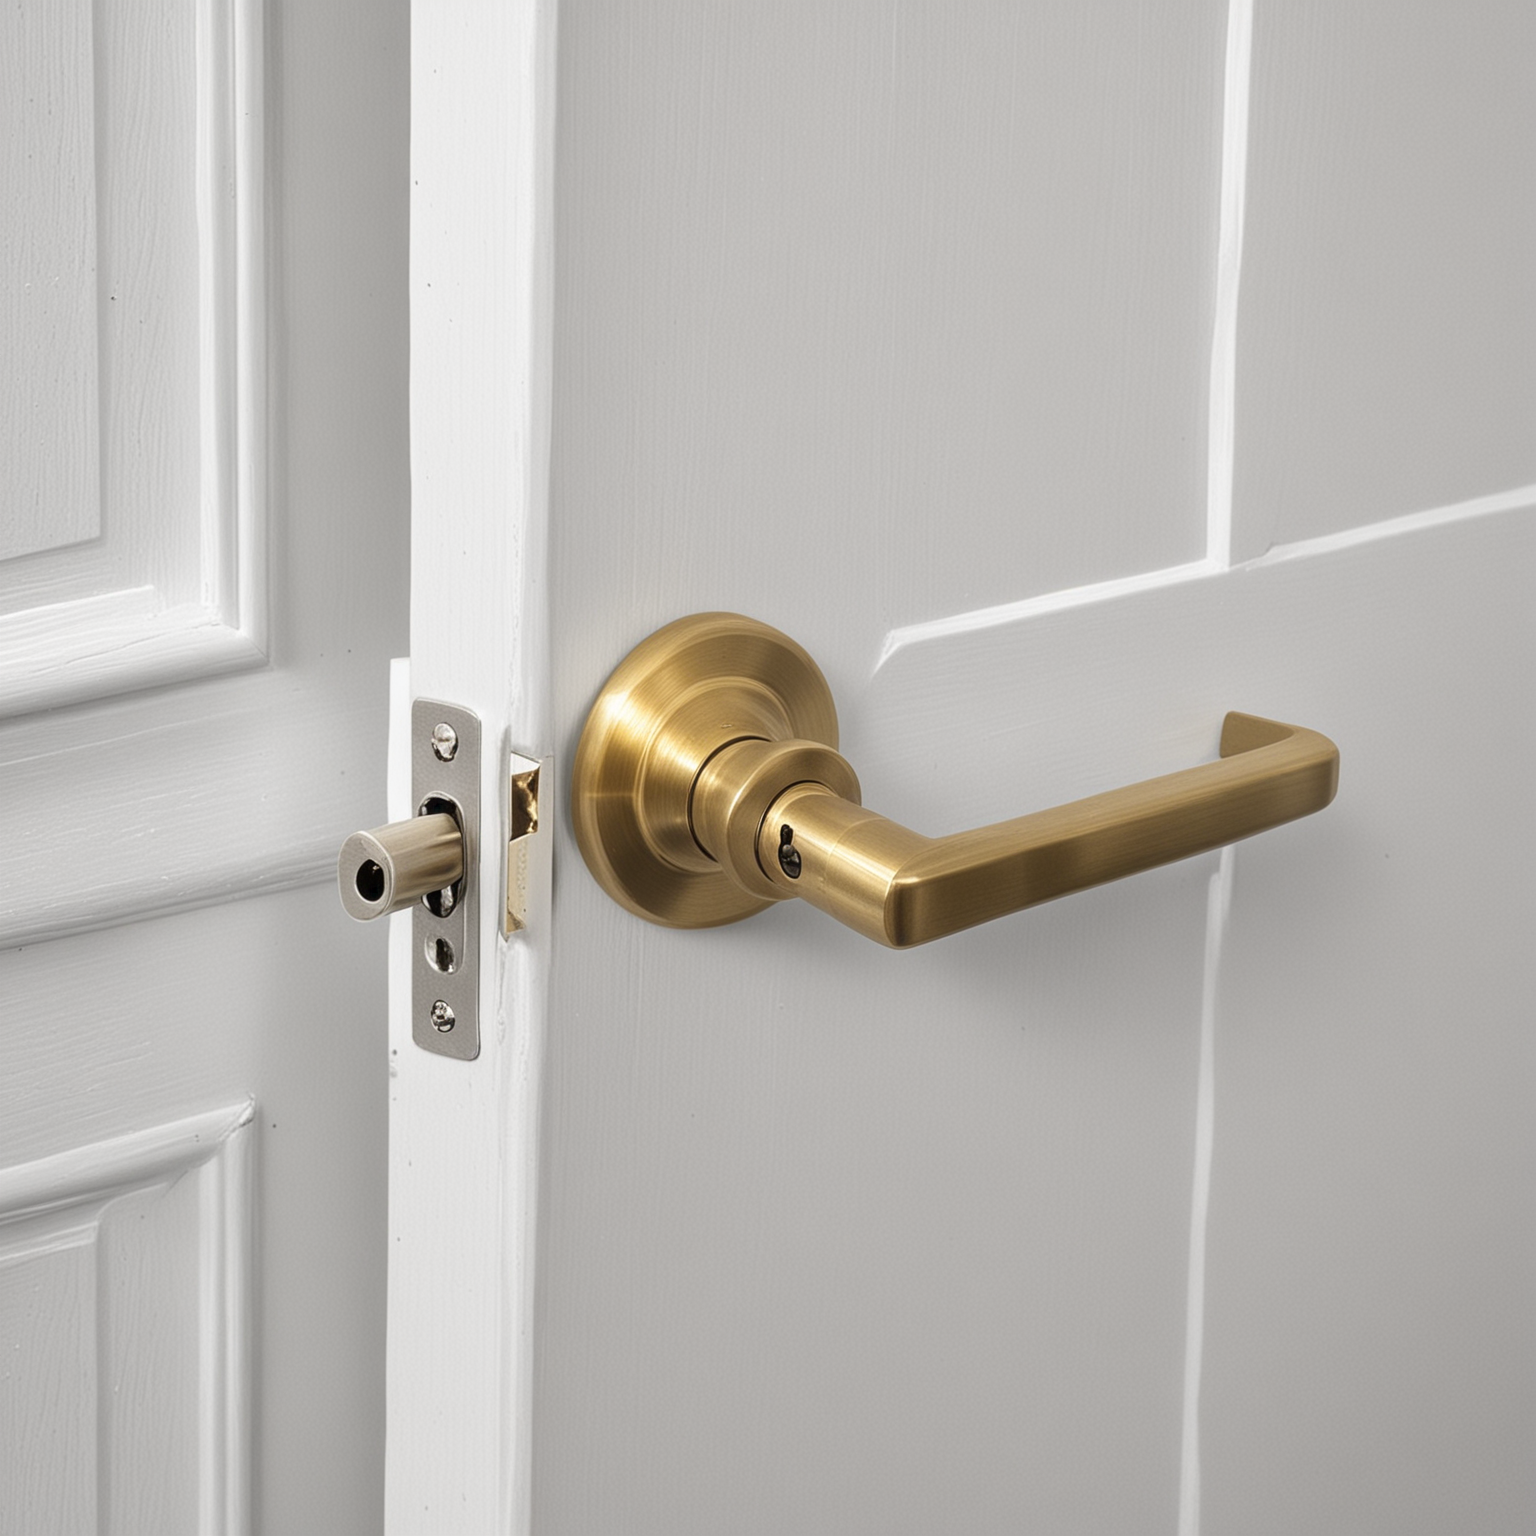 Professional Residential Locksmith in White Expert Key and Lock Services